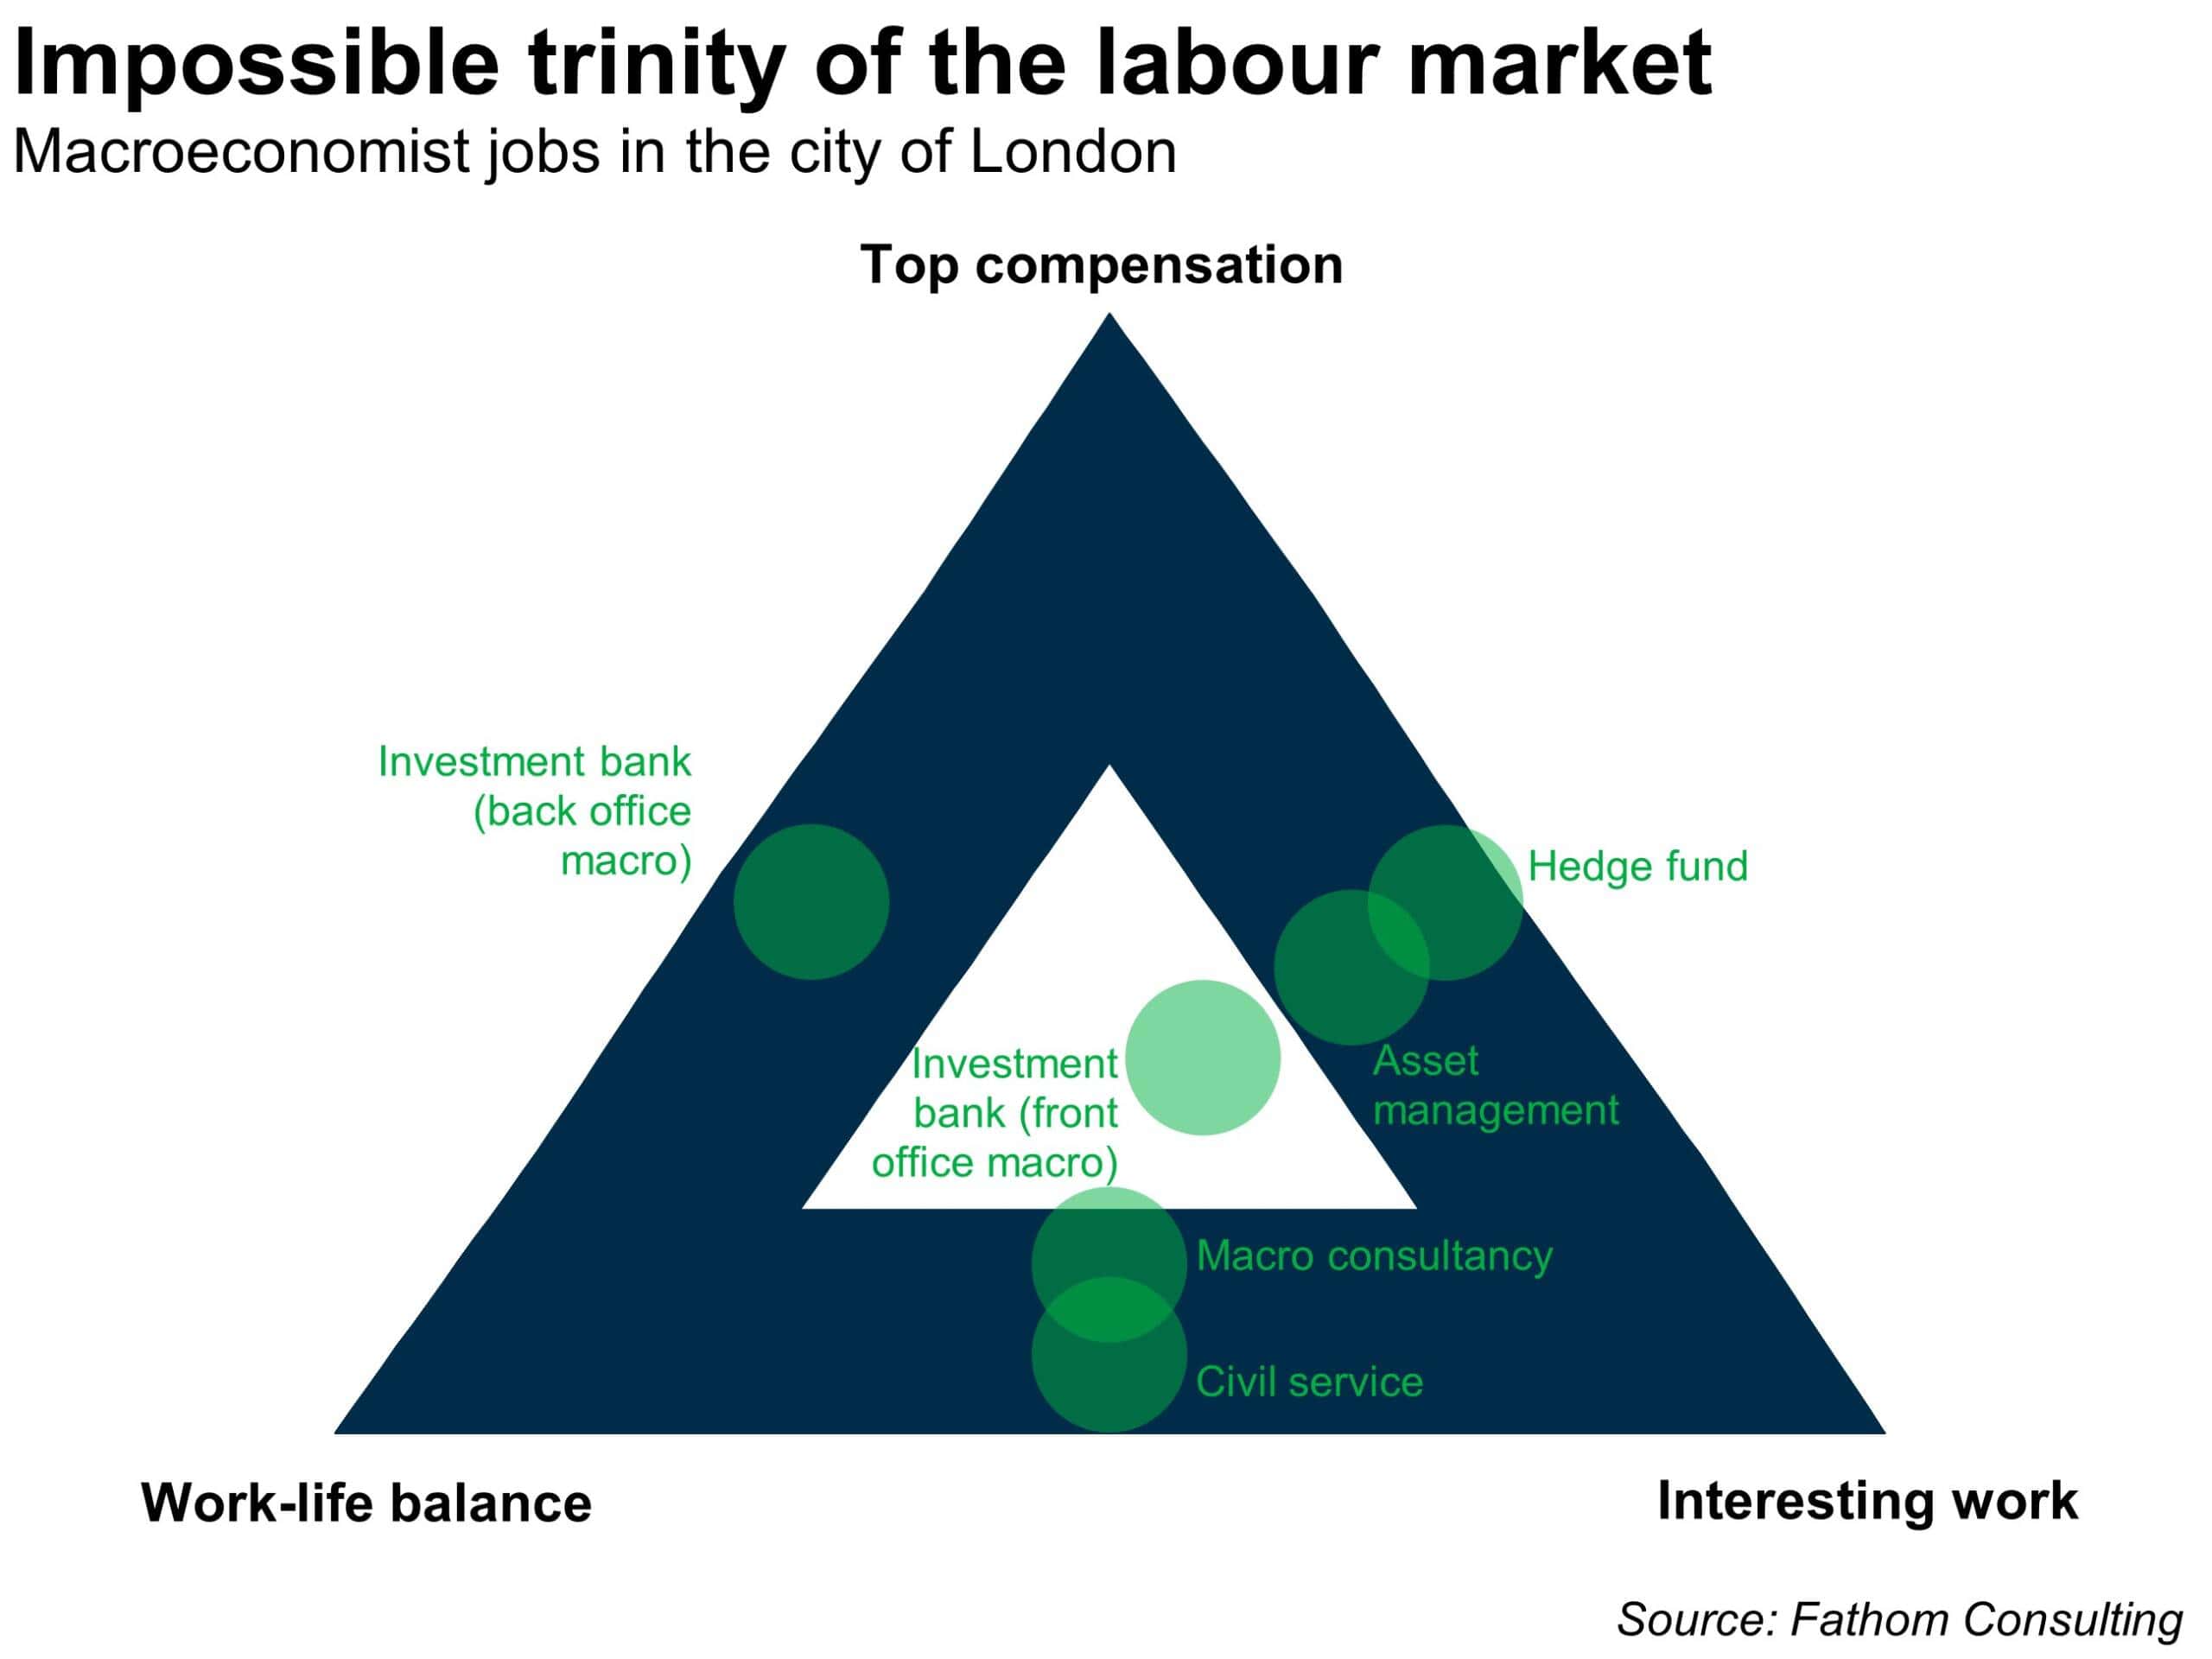 The impossible trinity of the labour market 